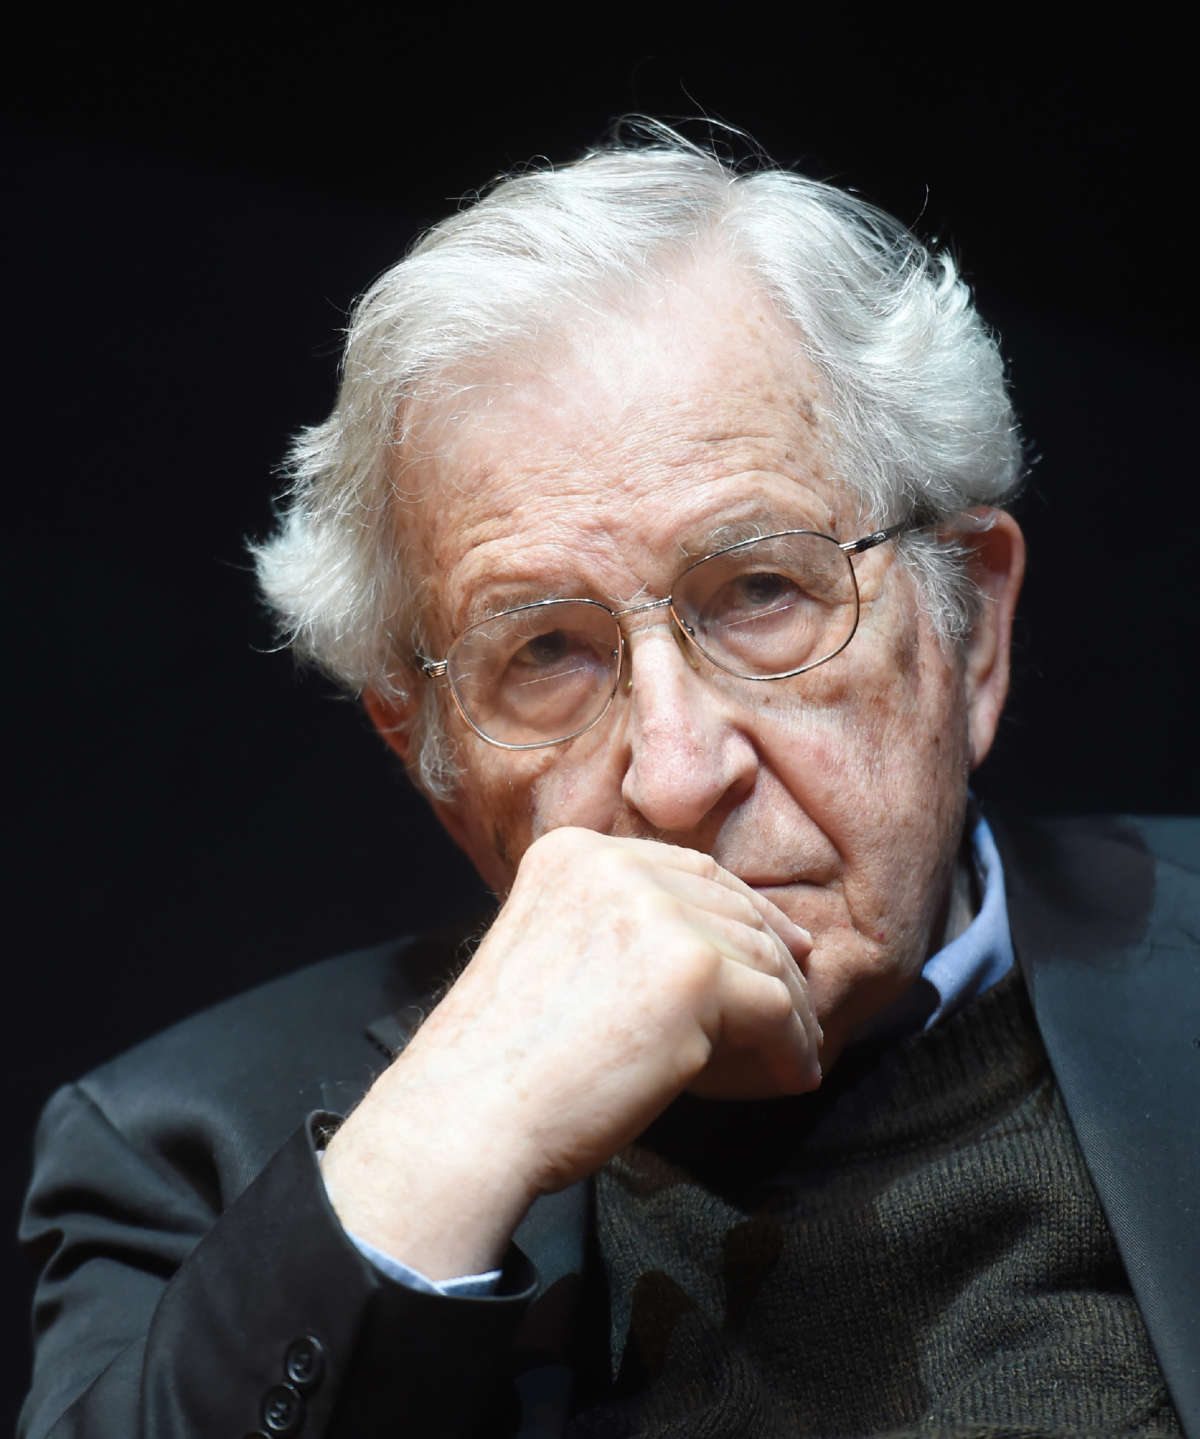 Noam Chomsky delivers a speech in the Center for Art and Media in Karlsruhe, Germany, on May 30, 2014.